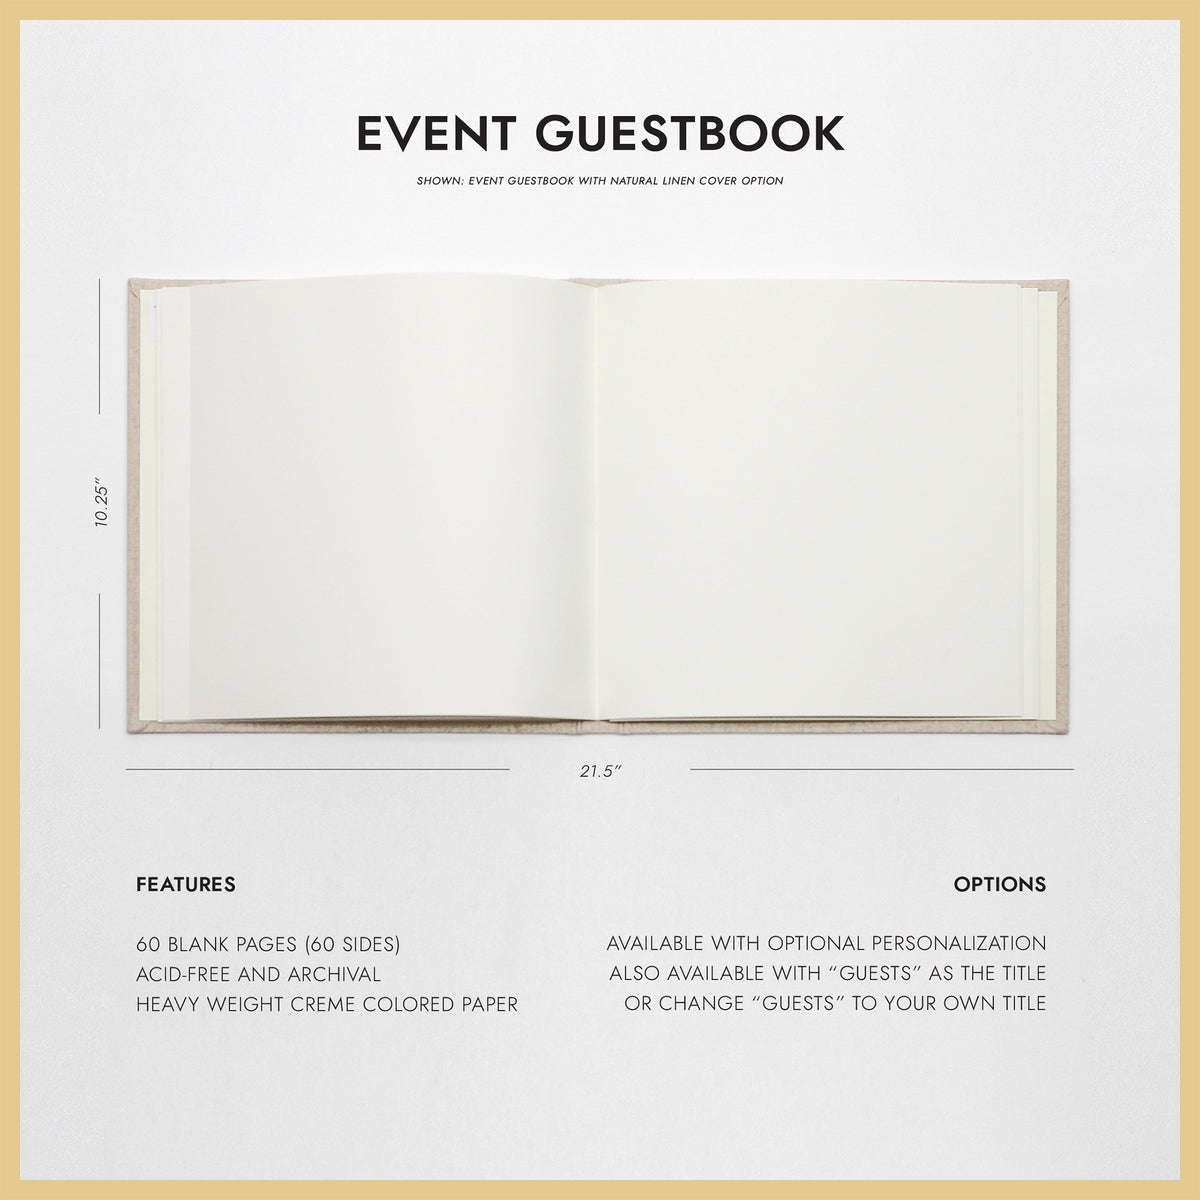 Event Guestbook | Cover: Mango Cotton | Available Personalized